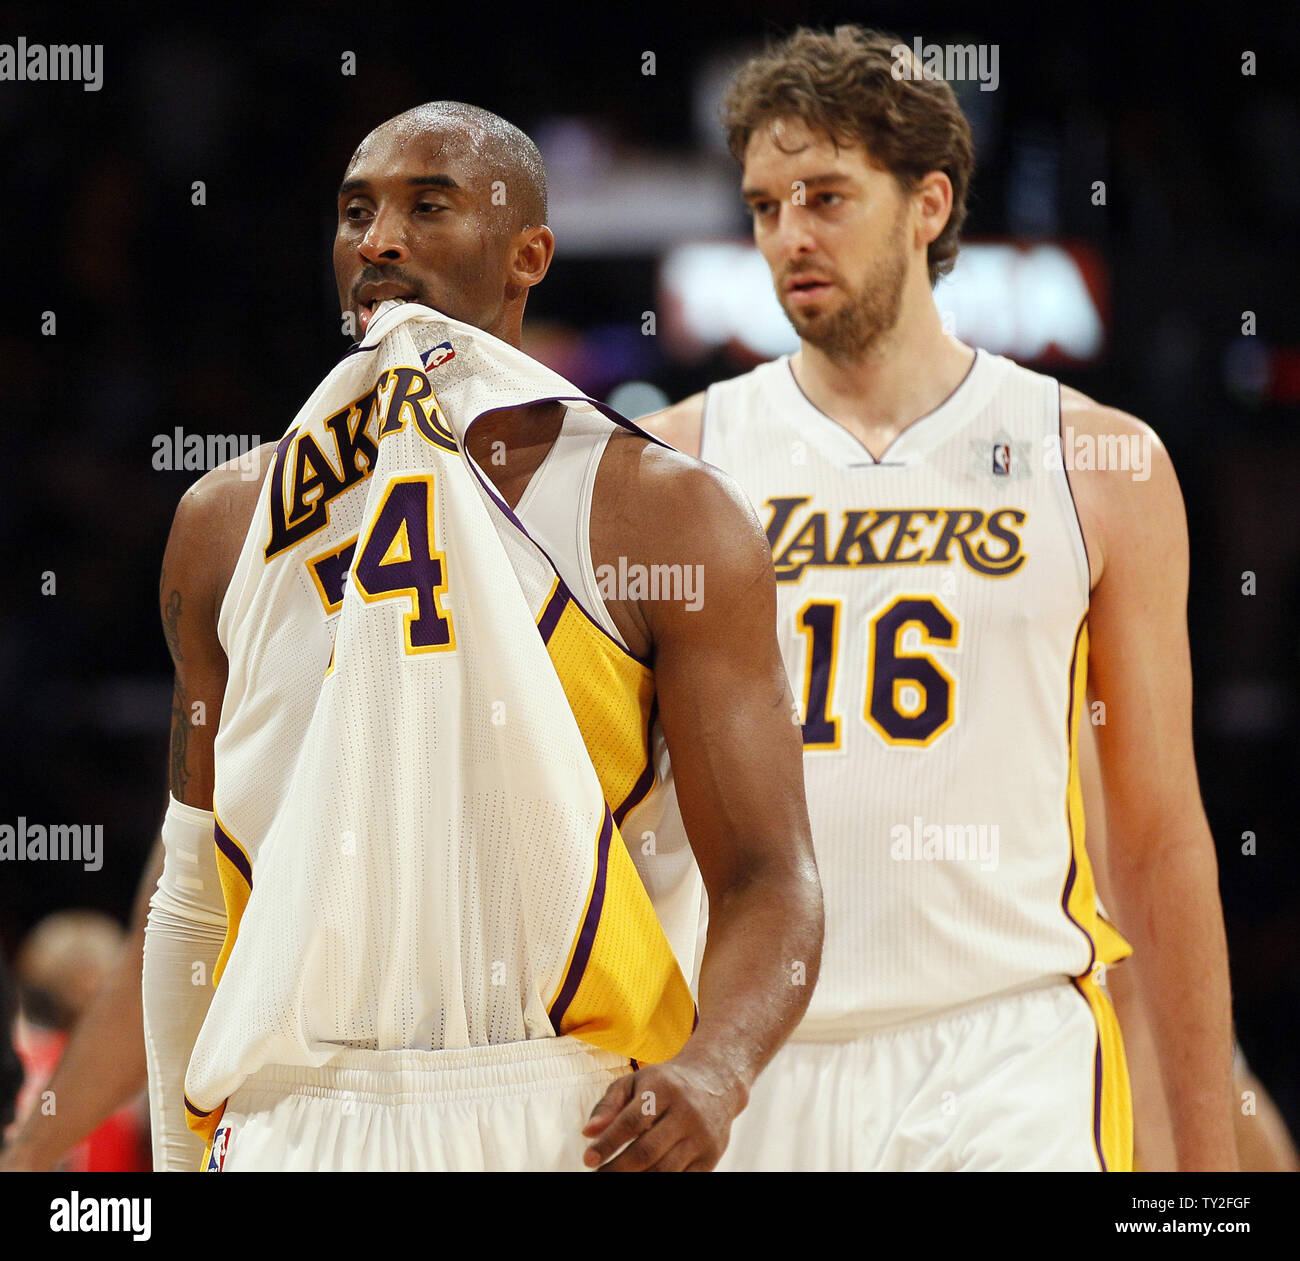 Los Angeles Lakers shooting guard Kobe Bryant (24) and Pau Gasol walk off the court in a timeout against the Chicago Bulls in the first half of their NBA basketball game in Los Angeles on December 25, 2011.    UPI/Lori Shepler Stock Photo